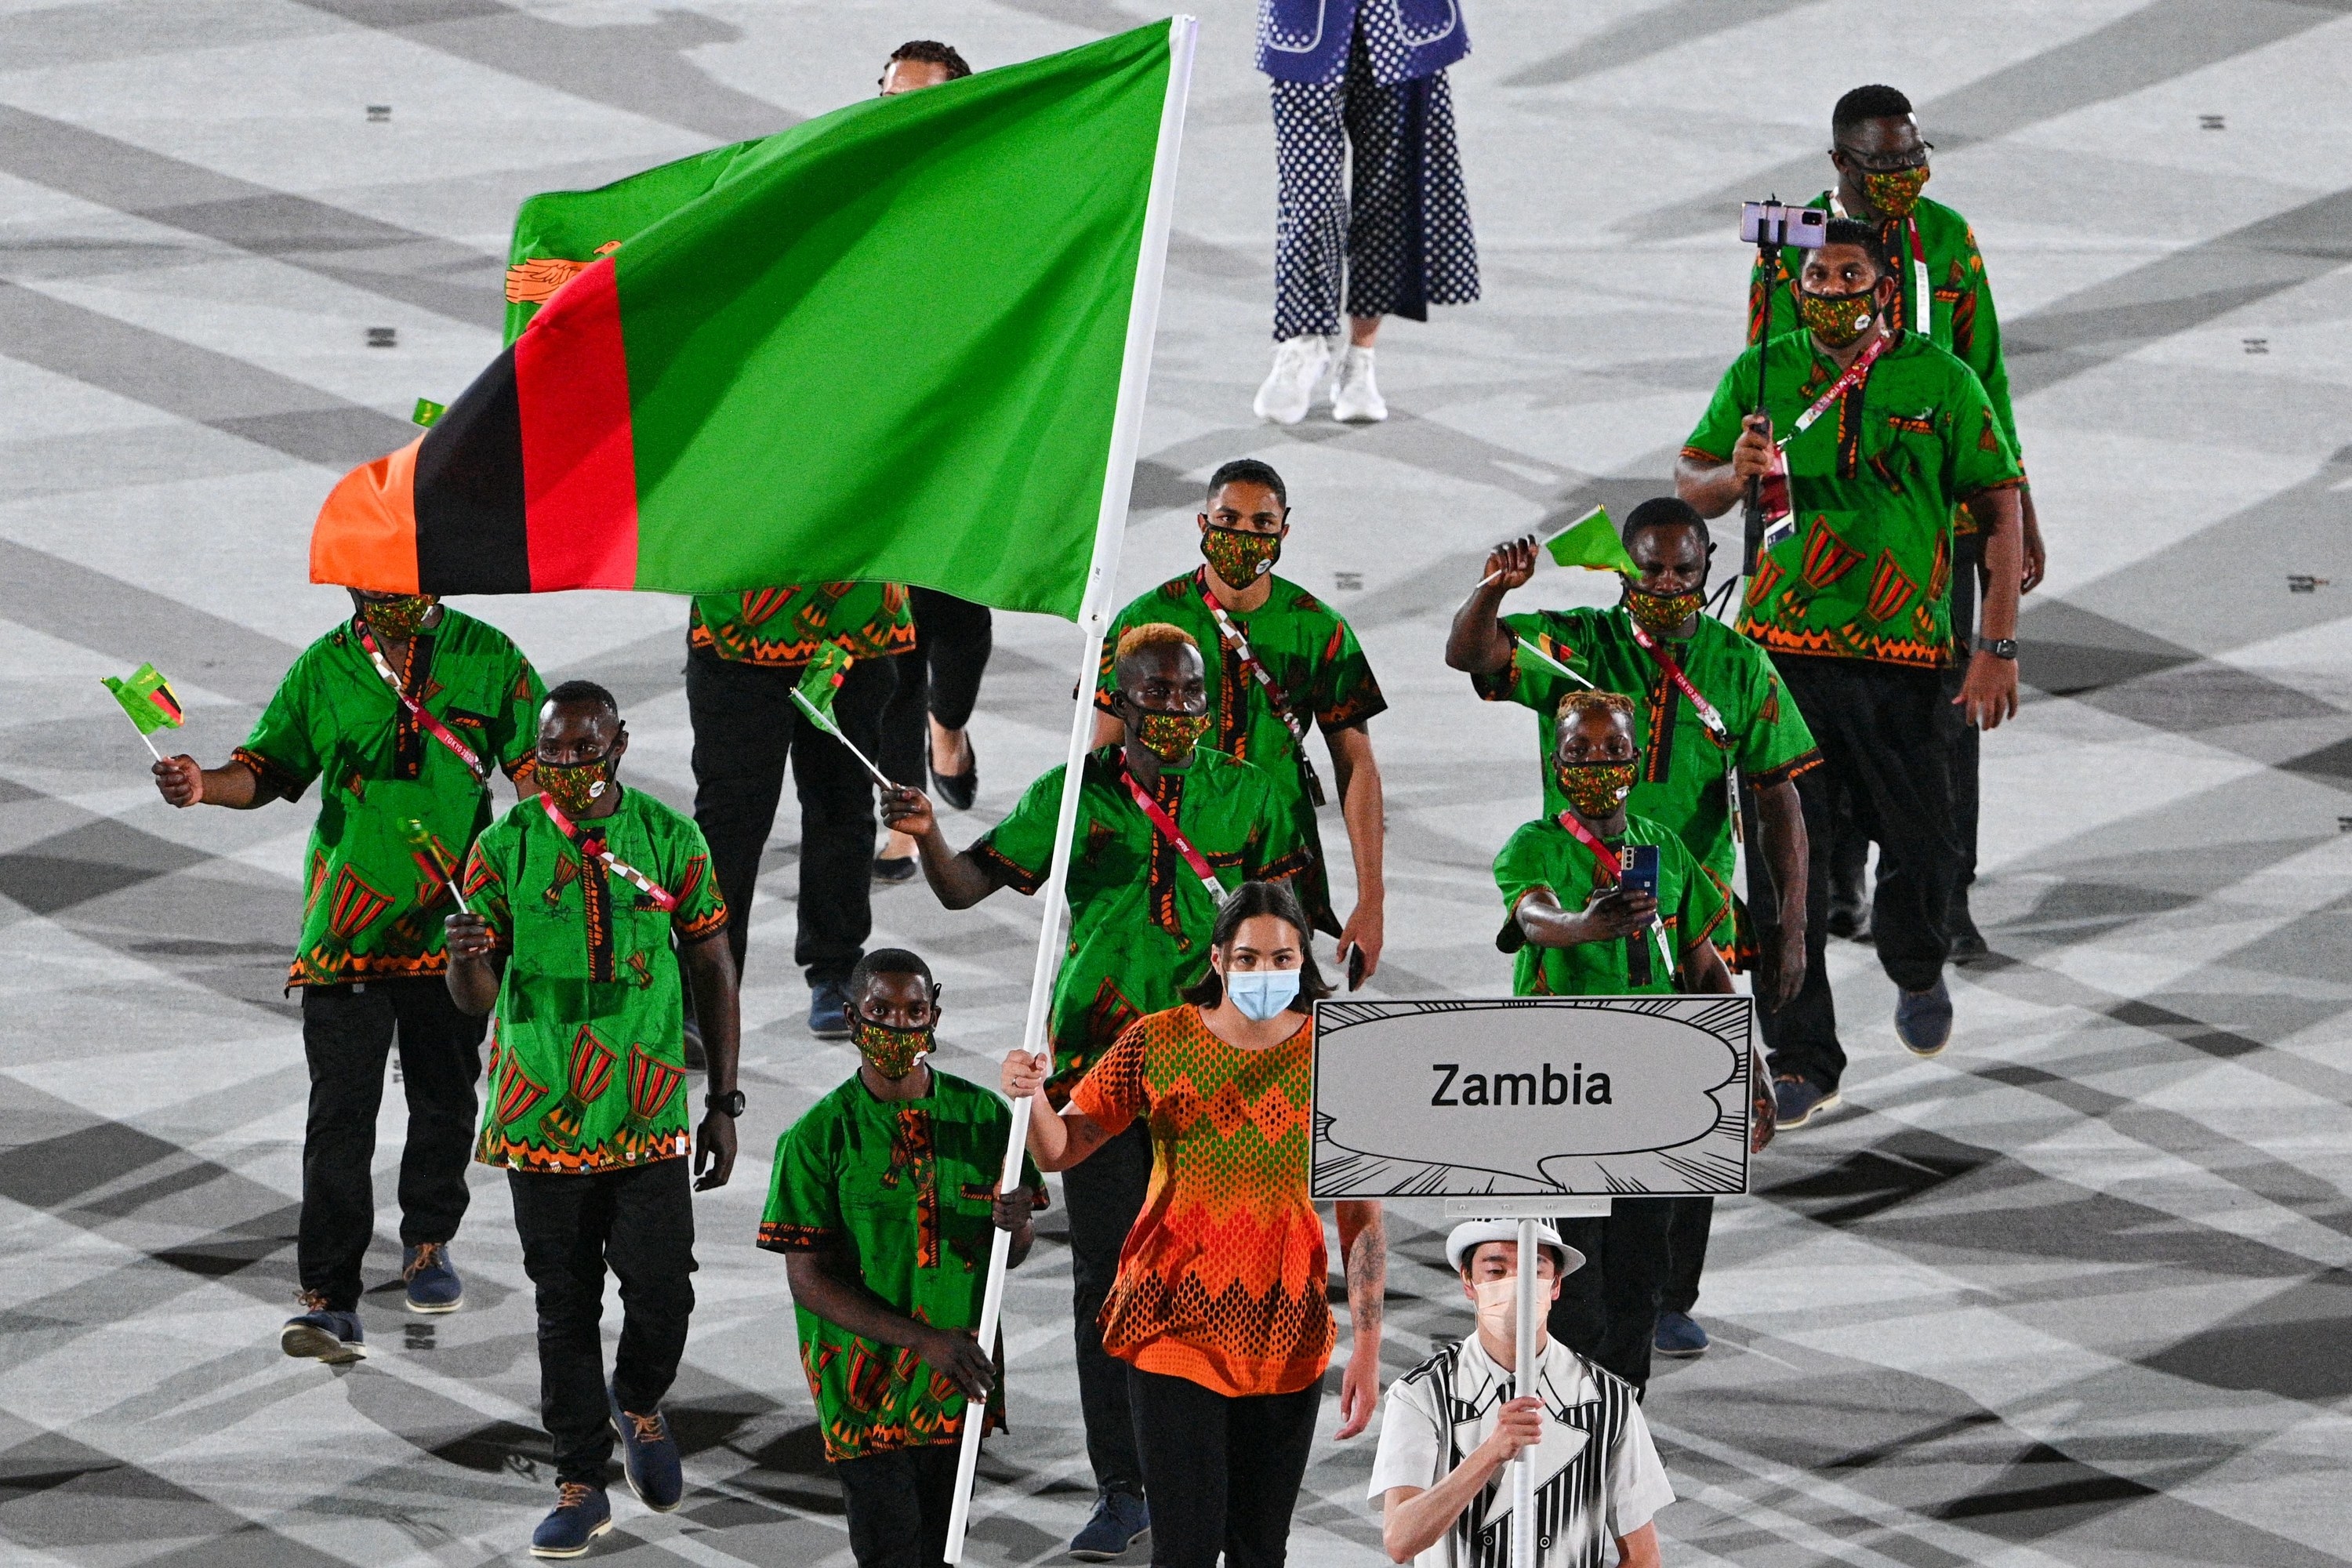 The Zambian athletes wore printed loose fitting tops and dark pants